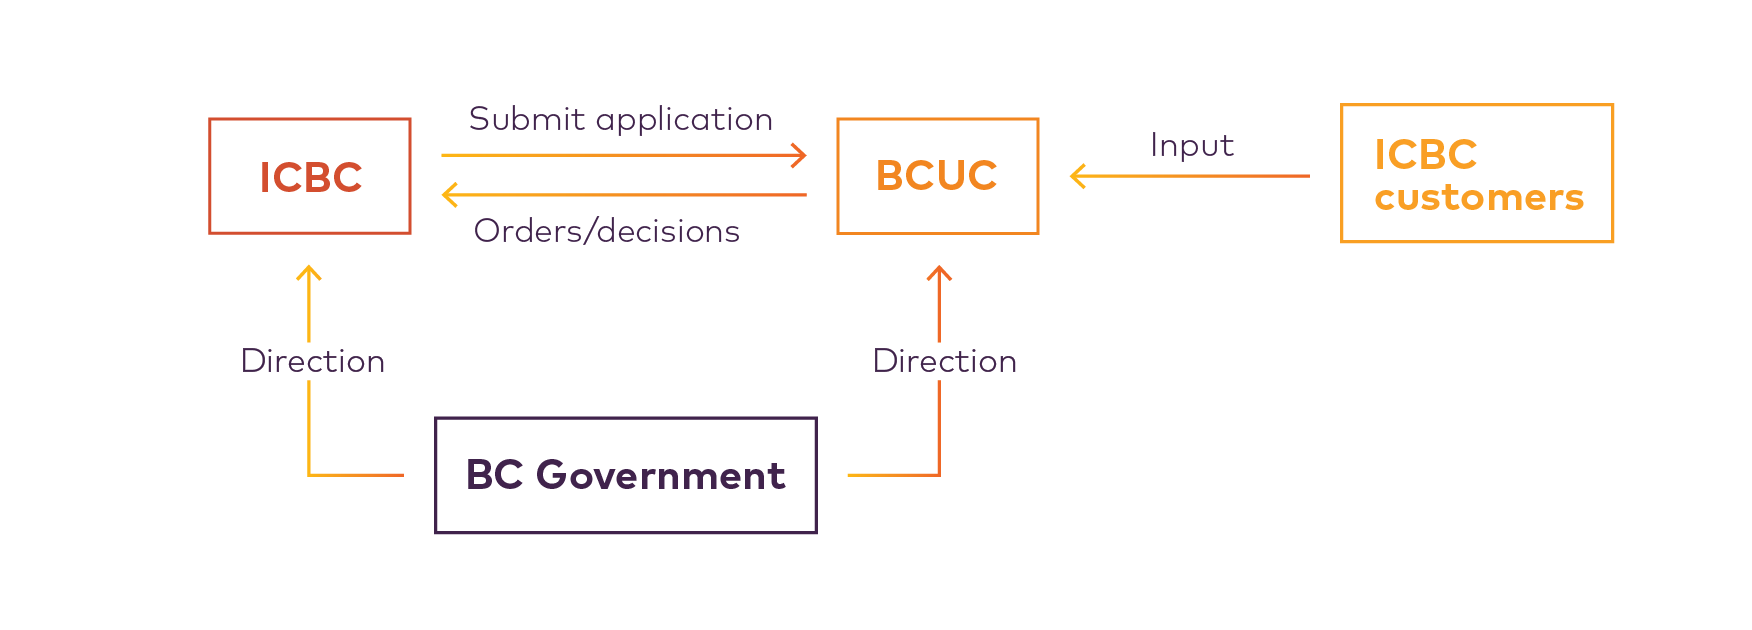 Role of BC Government